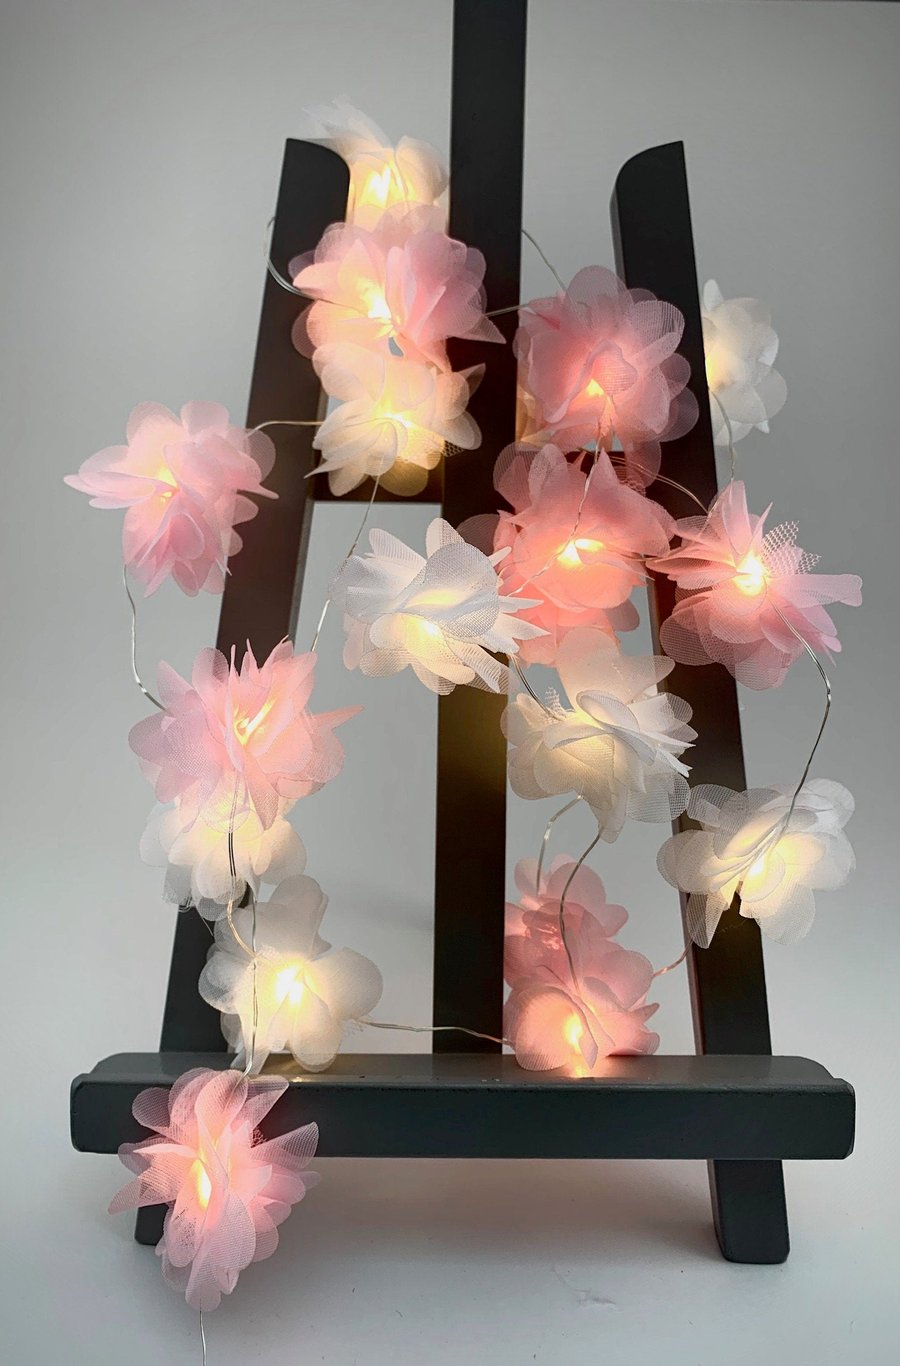 20 chiffon flower Fairy Lights -  in baby pink and white.